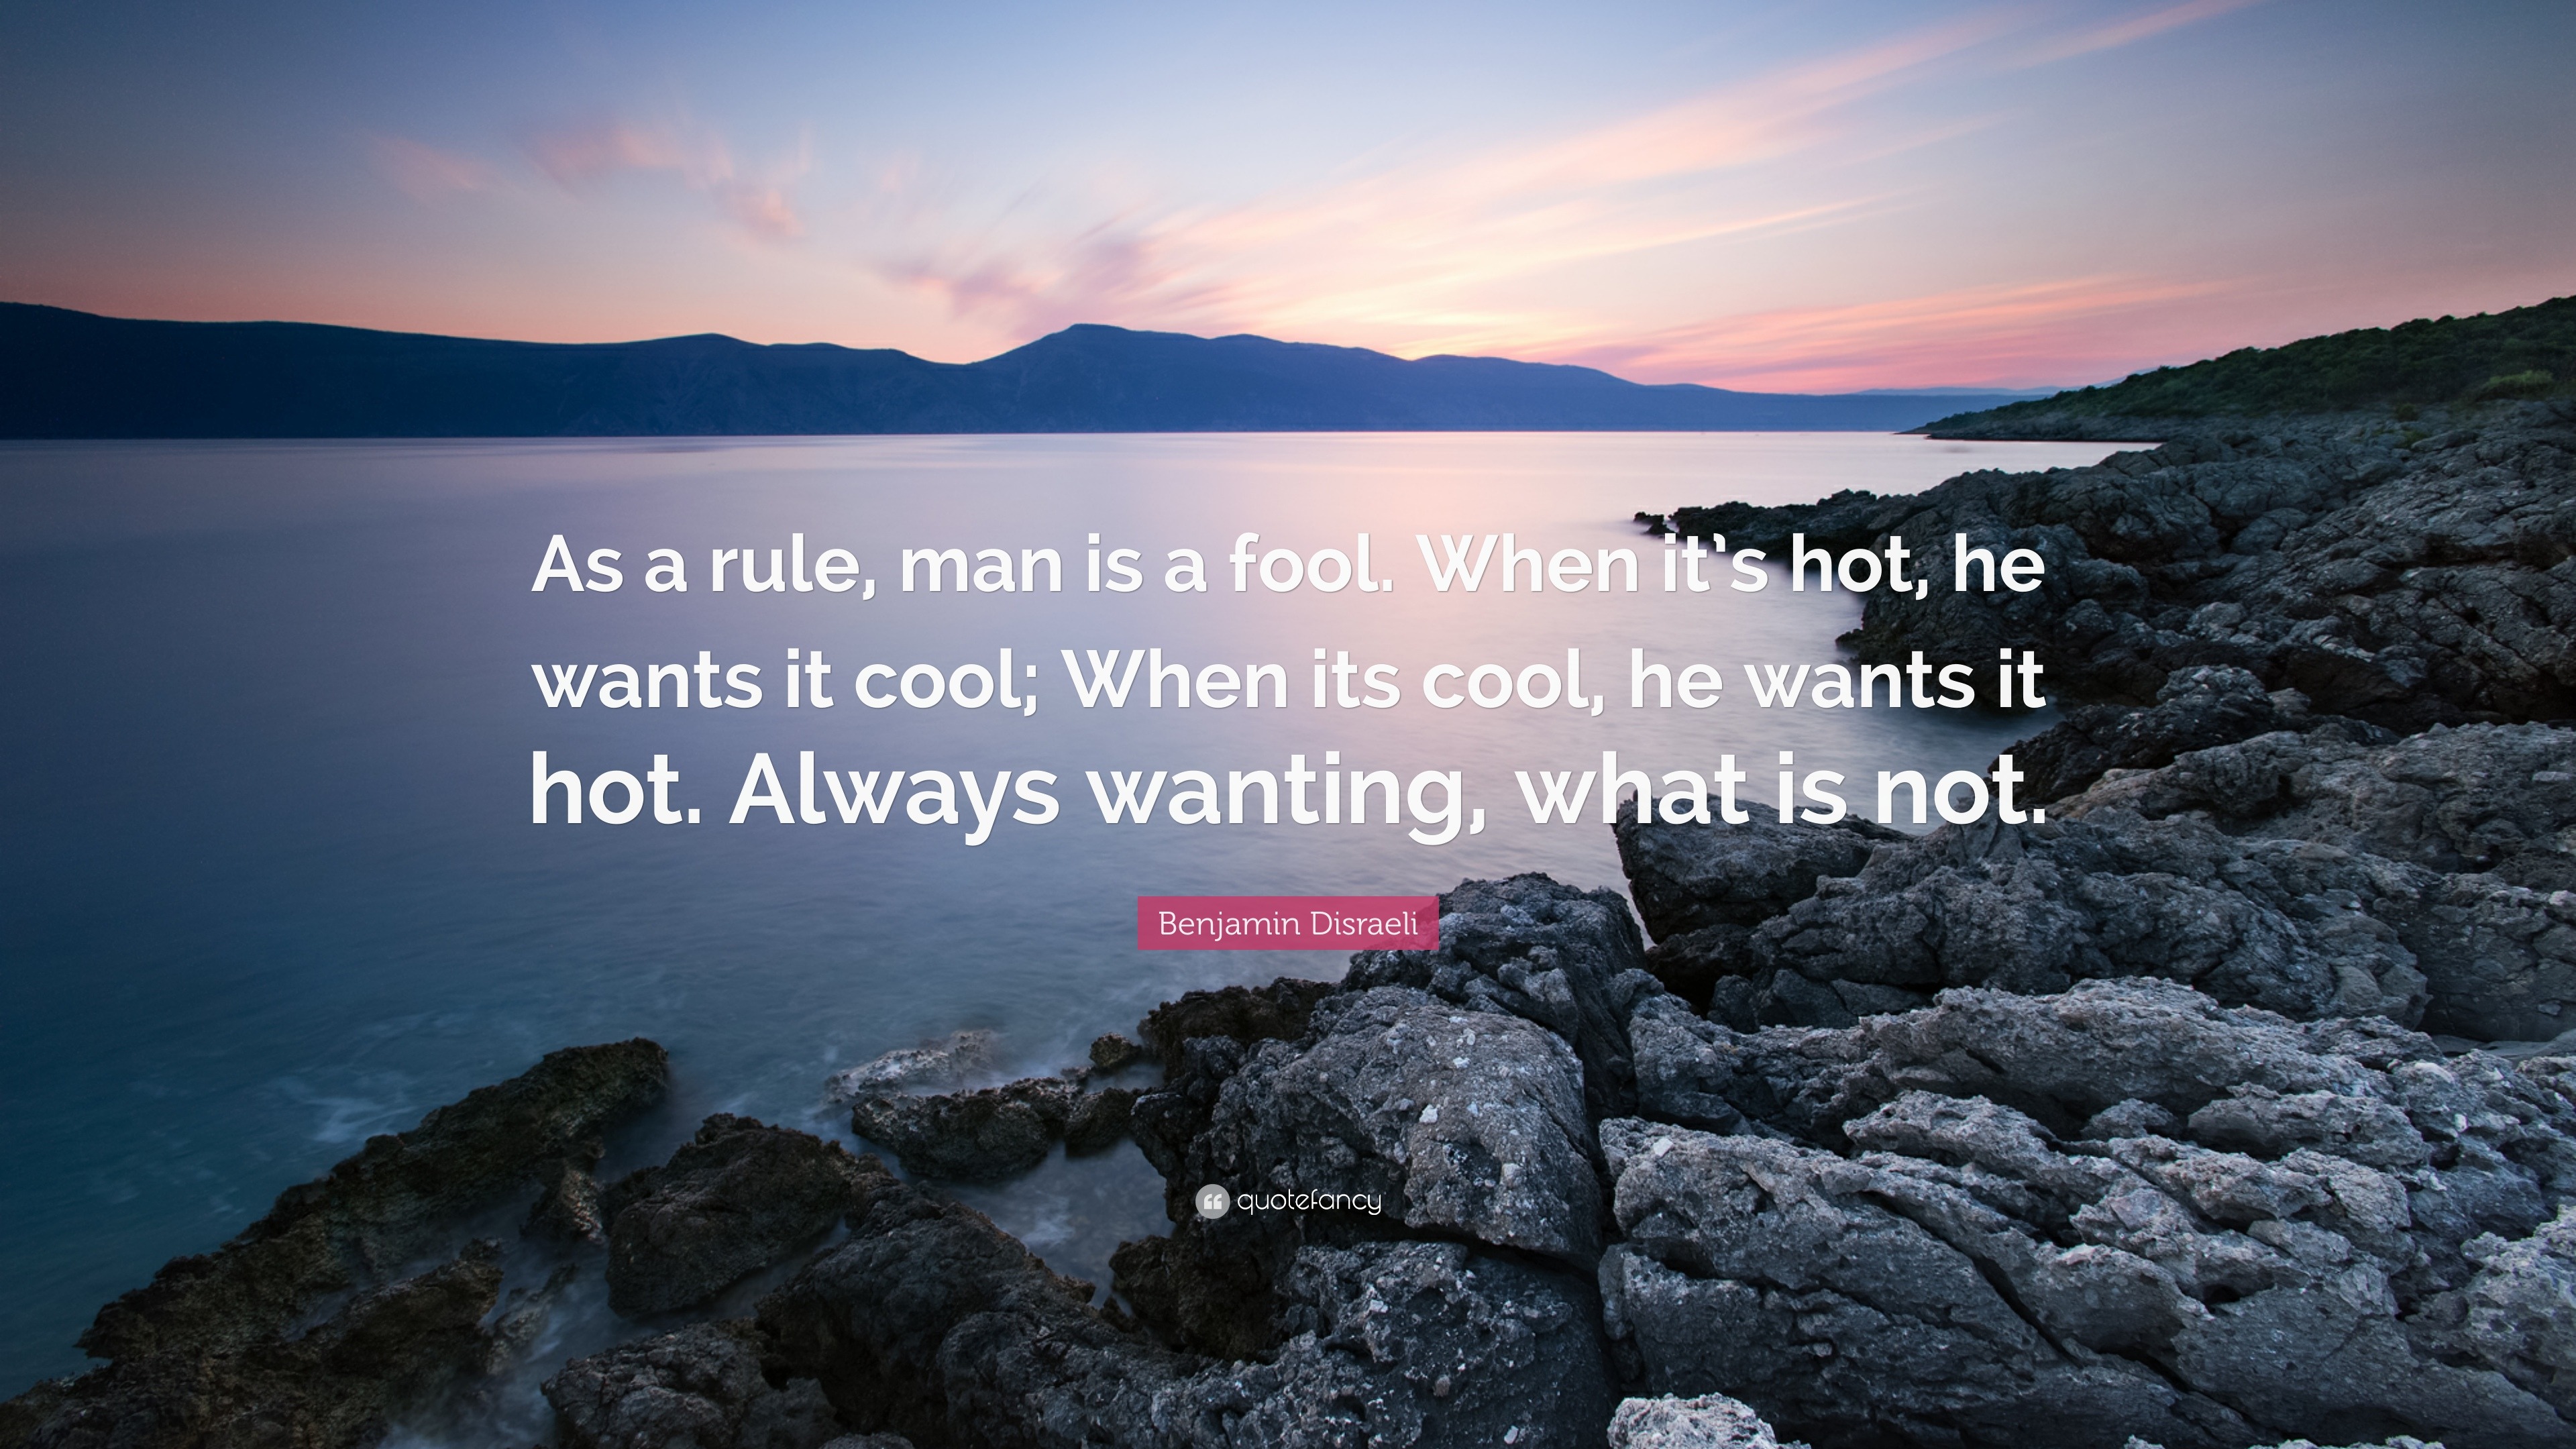 Benjamin Disraeli Quote: “As a rule, man is a fool. When it's hot